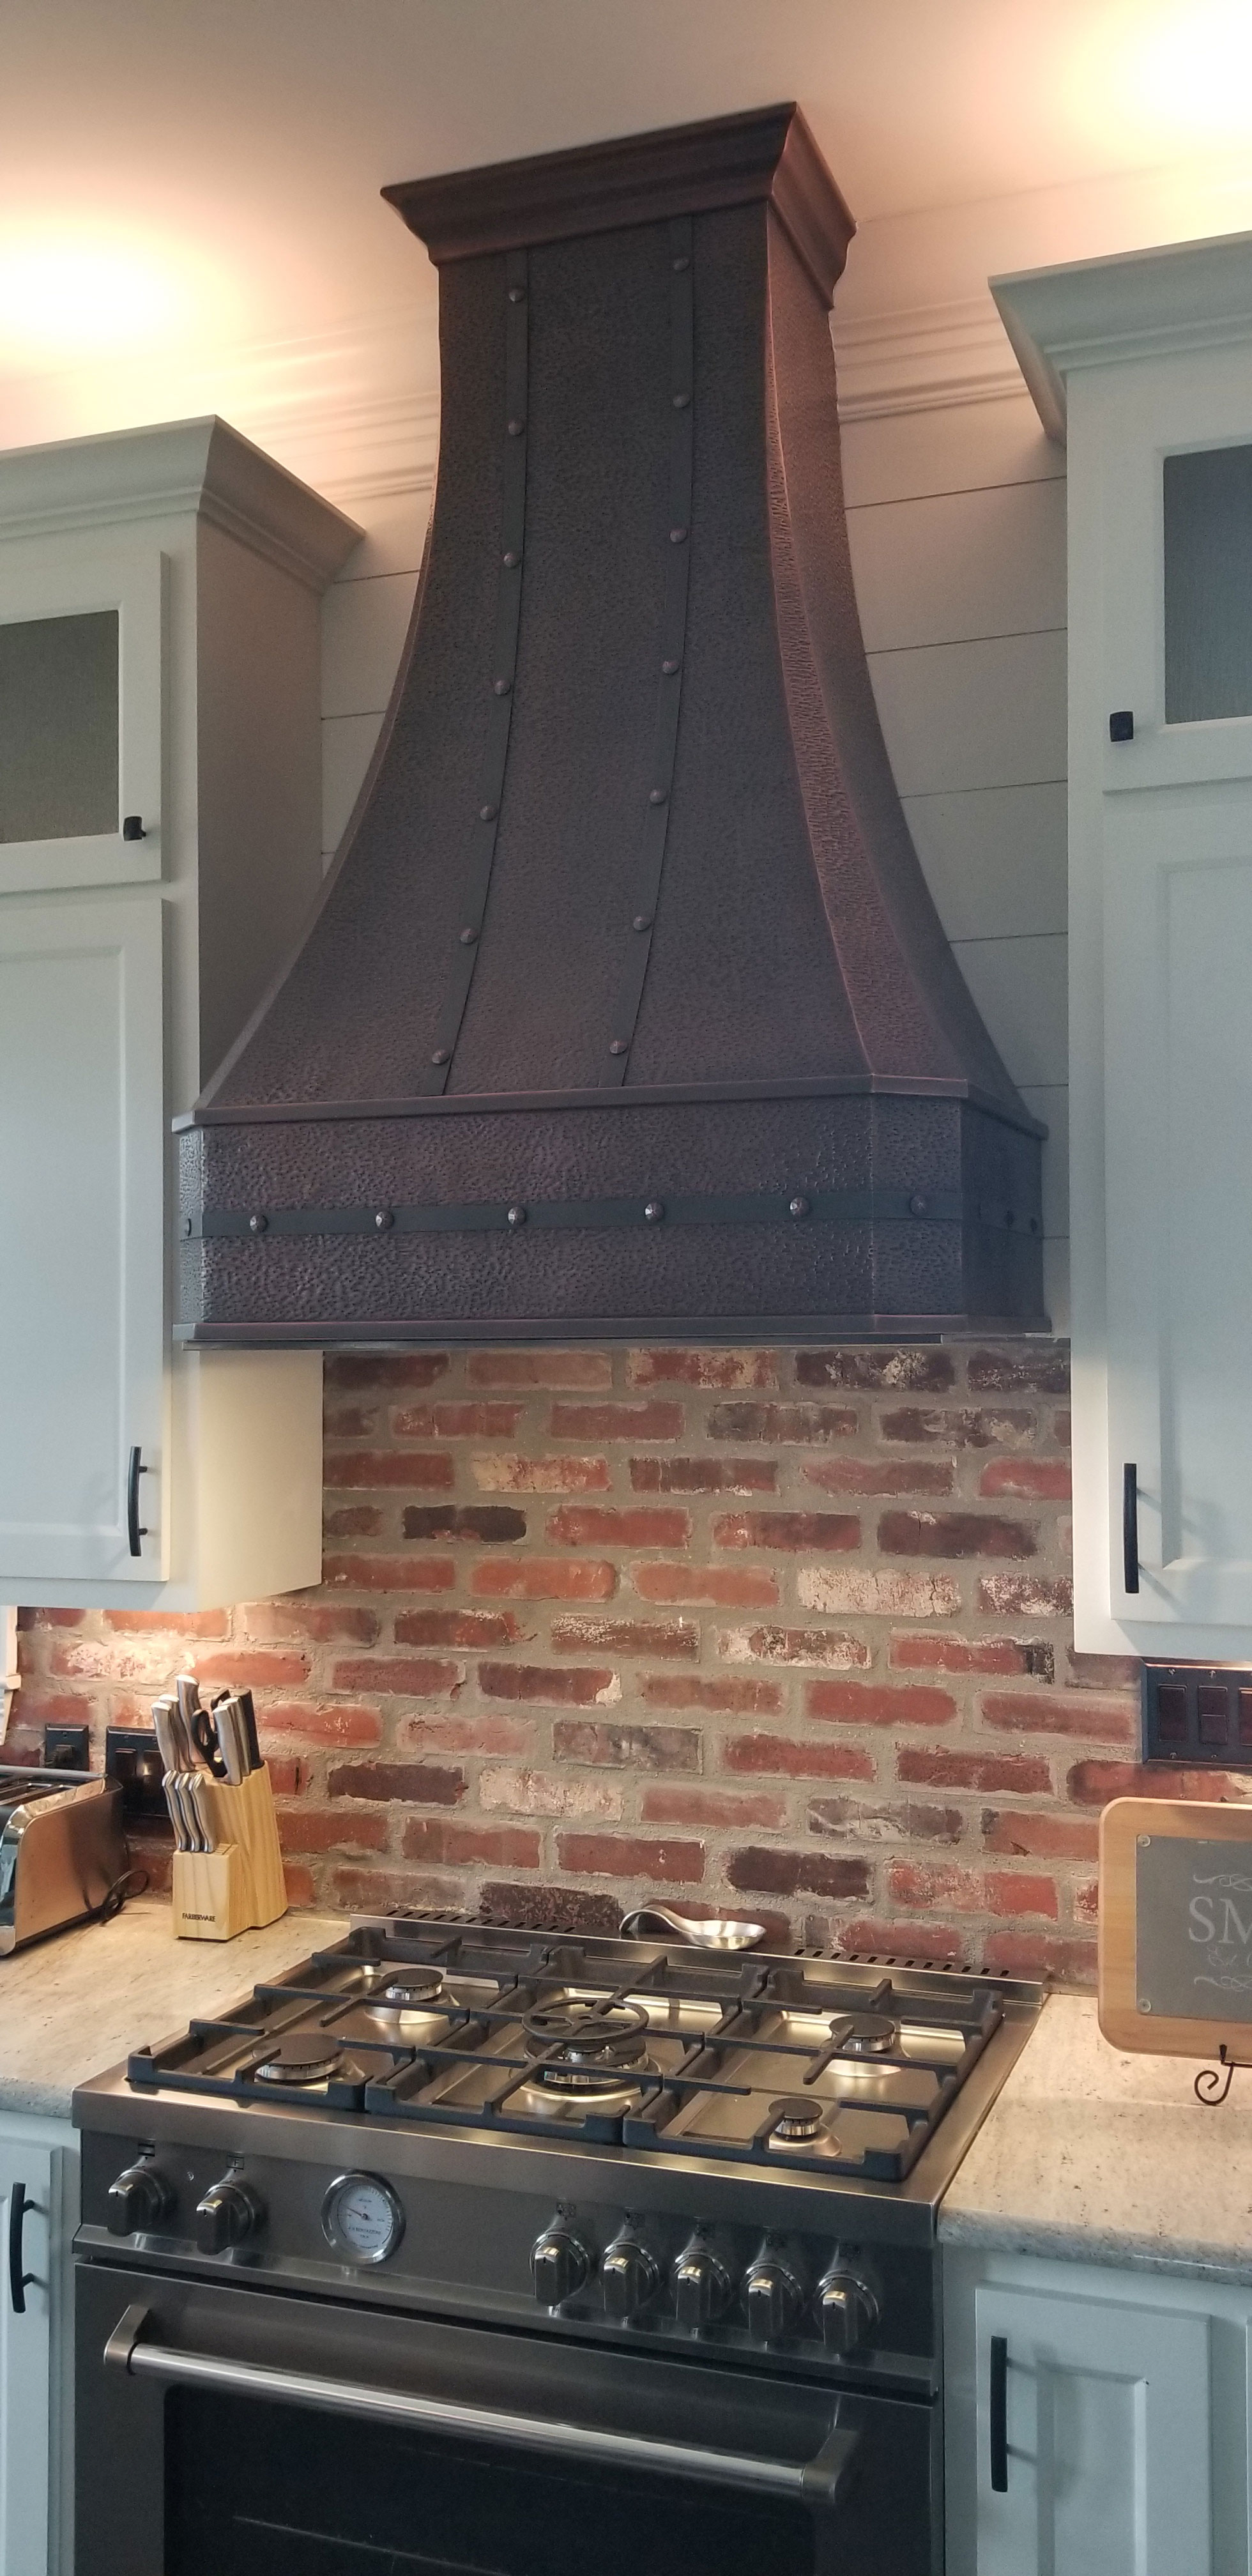 Narrow copper range hood with brick wall World CopperSmith